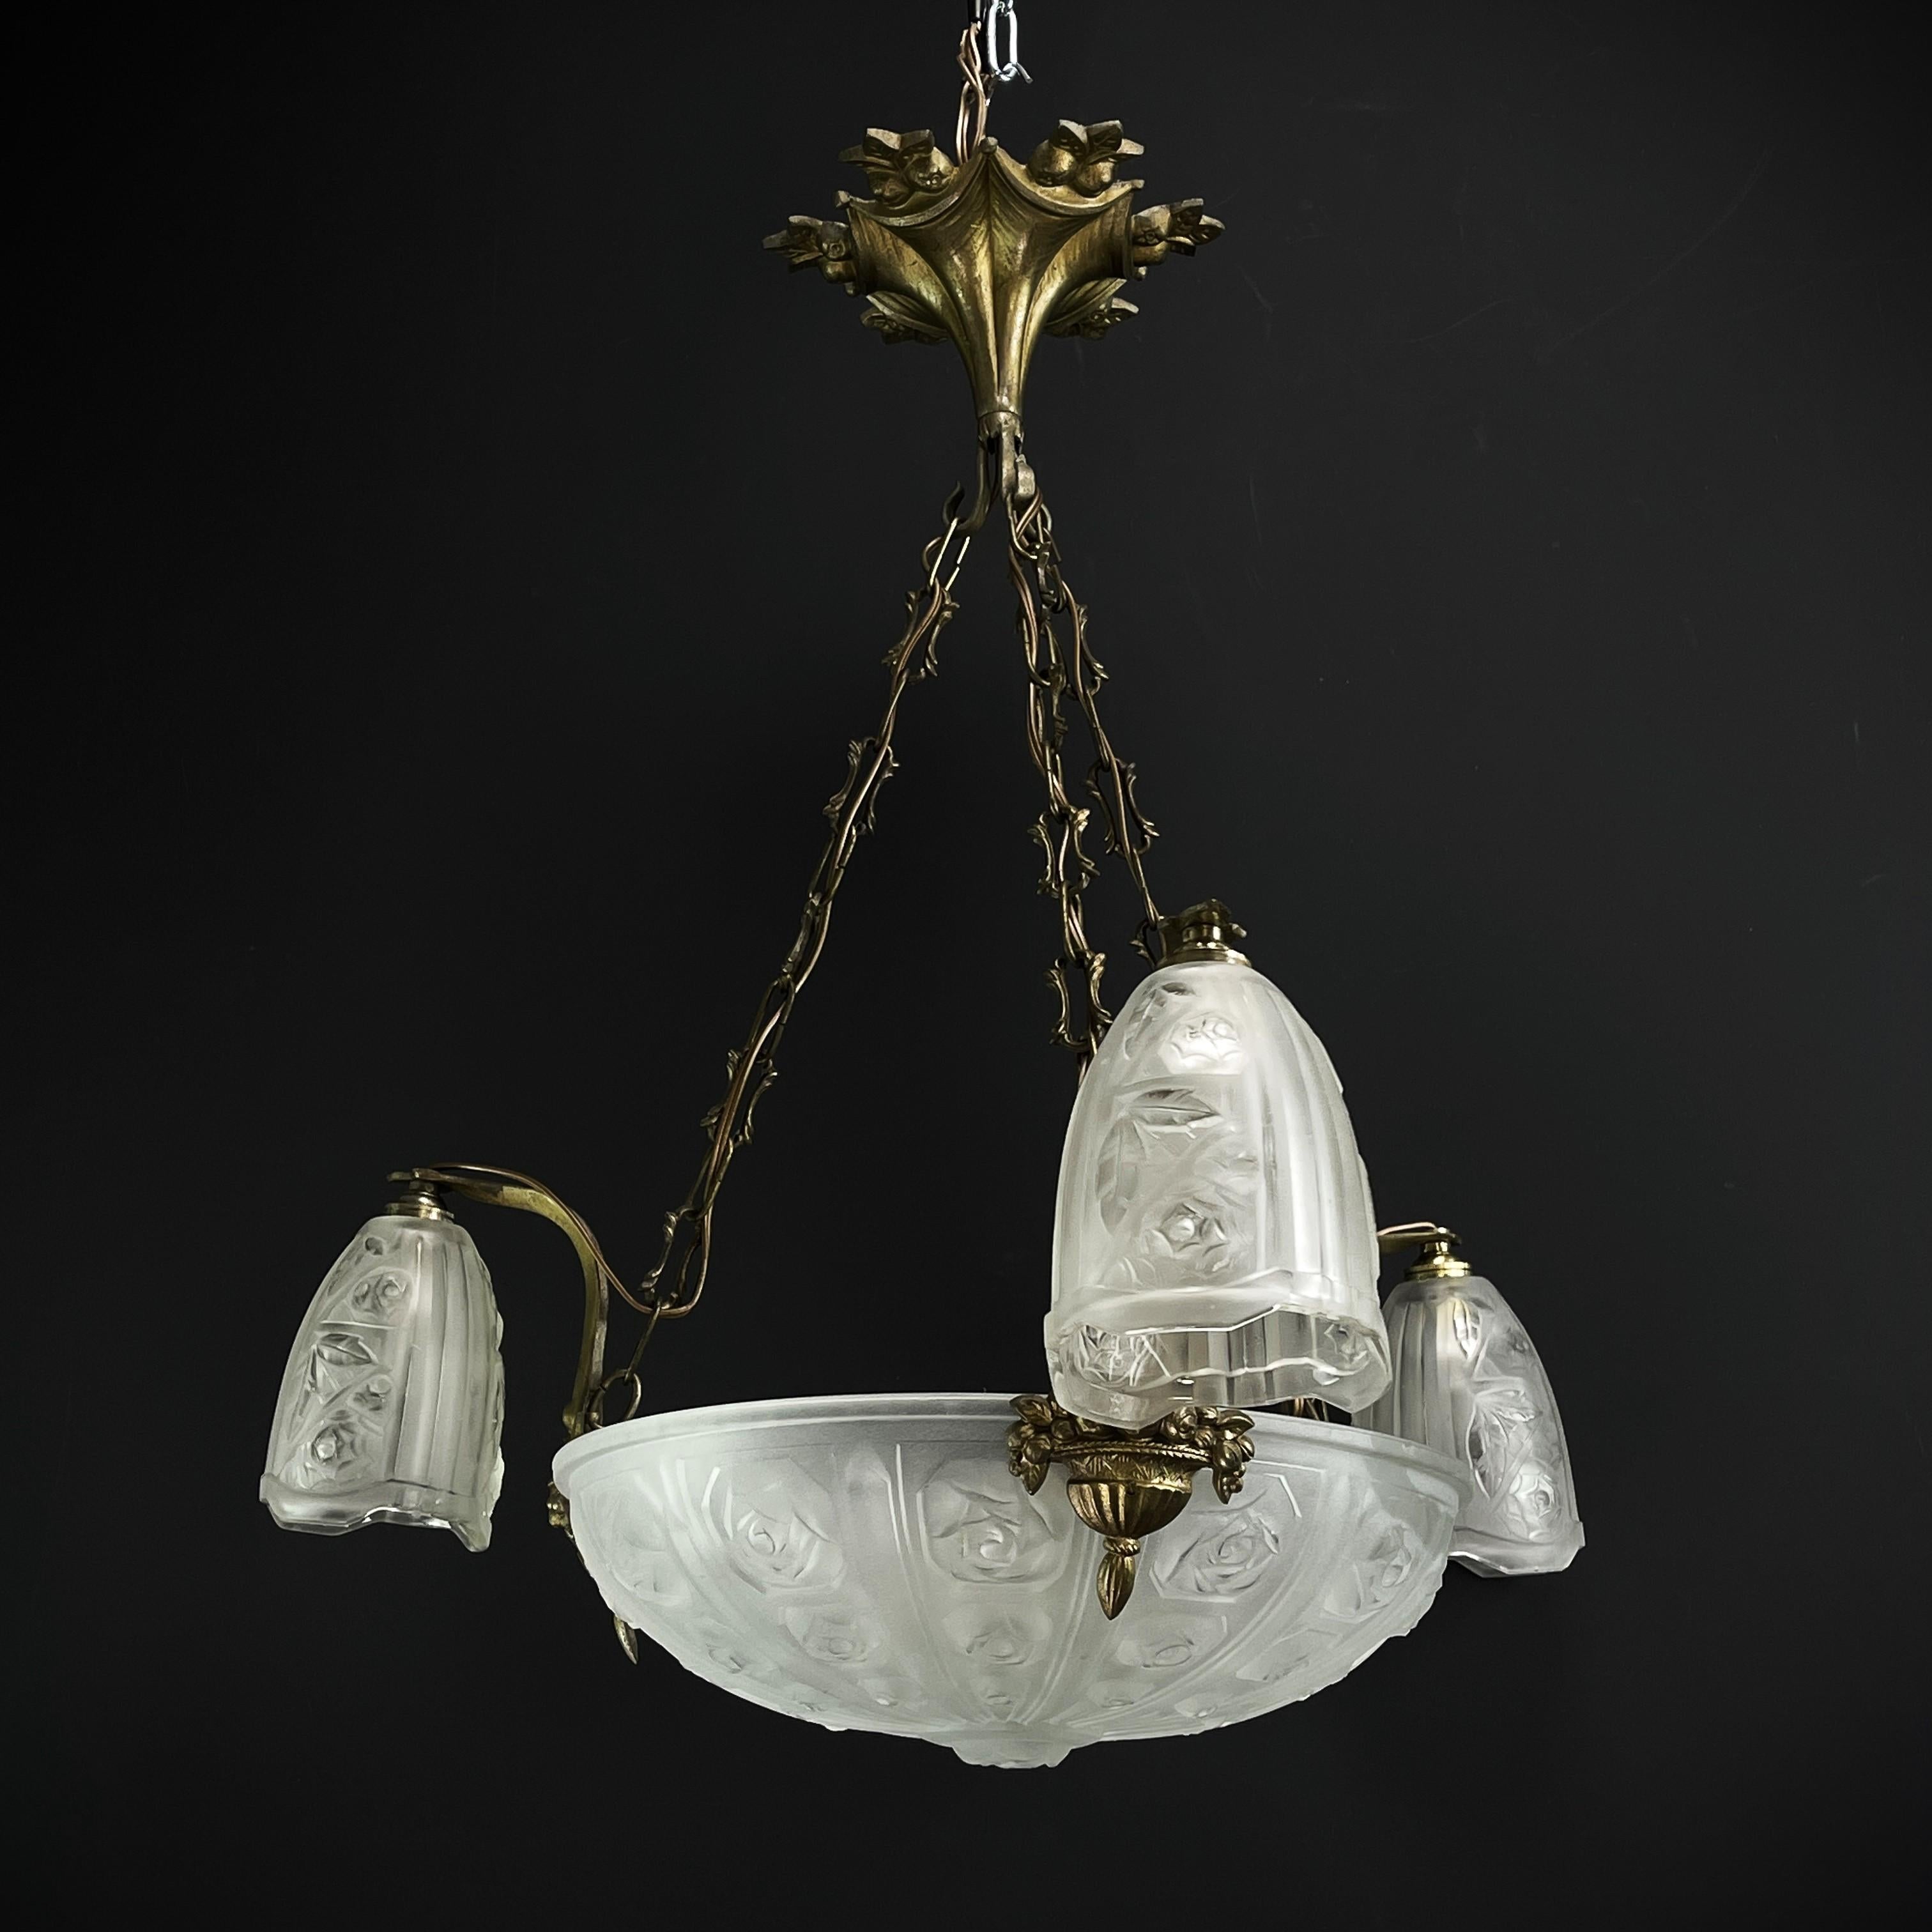 Art Deco chandelier with rose décor

This stunning Art Deco chandelier from the 1930s is an outstanding example of the elegance and sophistication of the Art Deco style. With its combination of metal and glass, this chandelier embodies the glamour